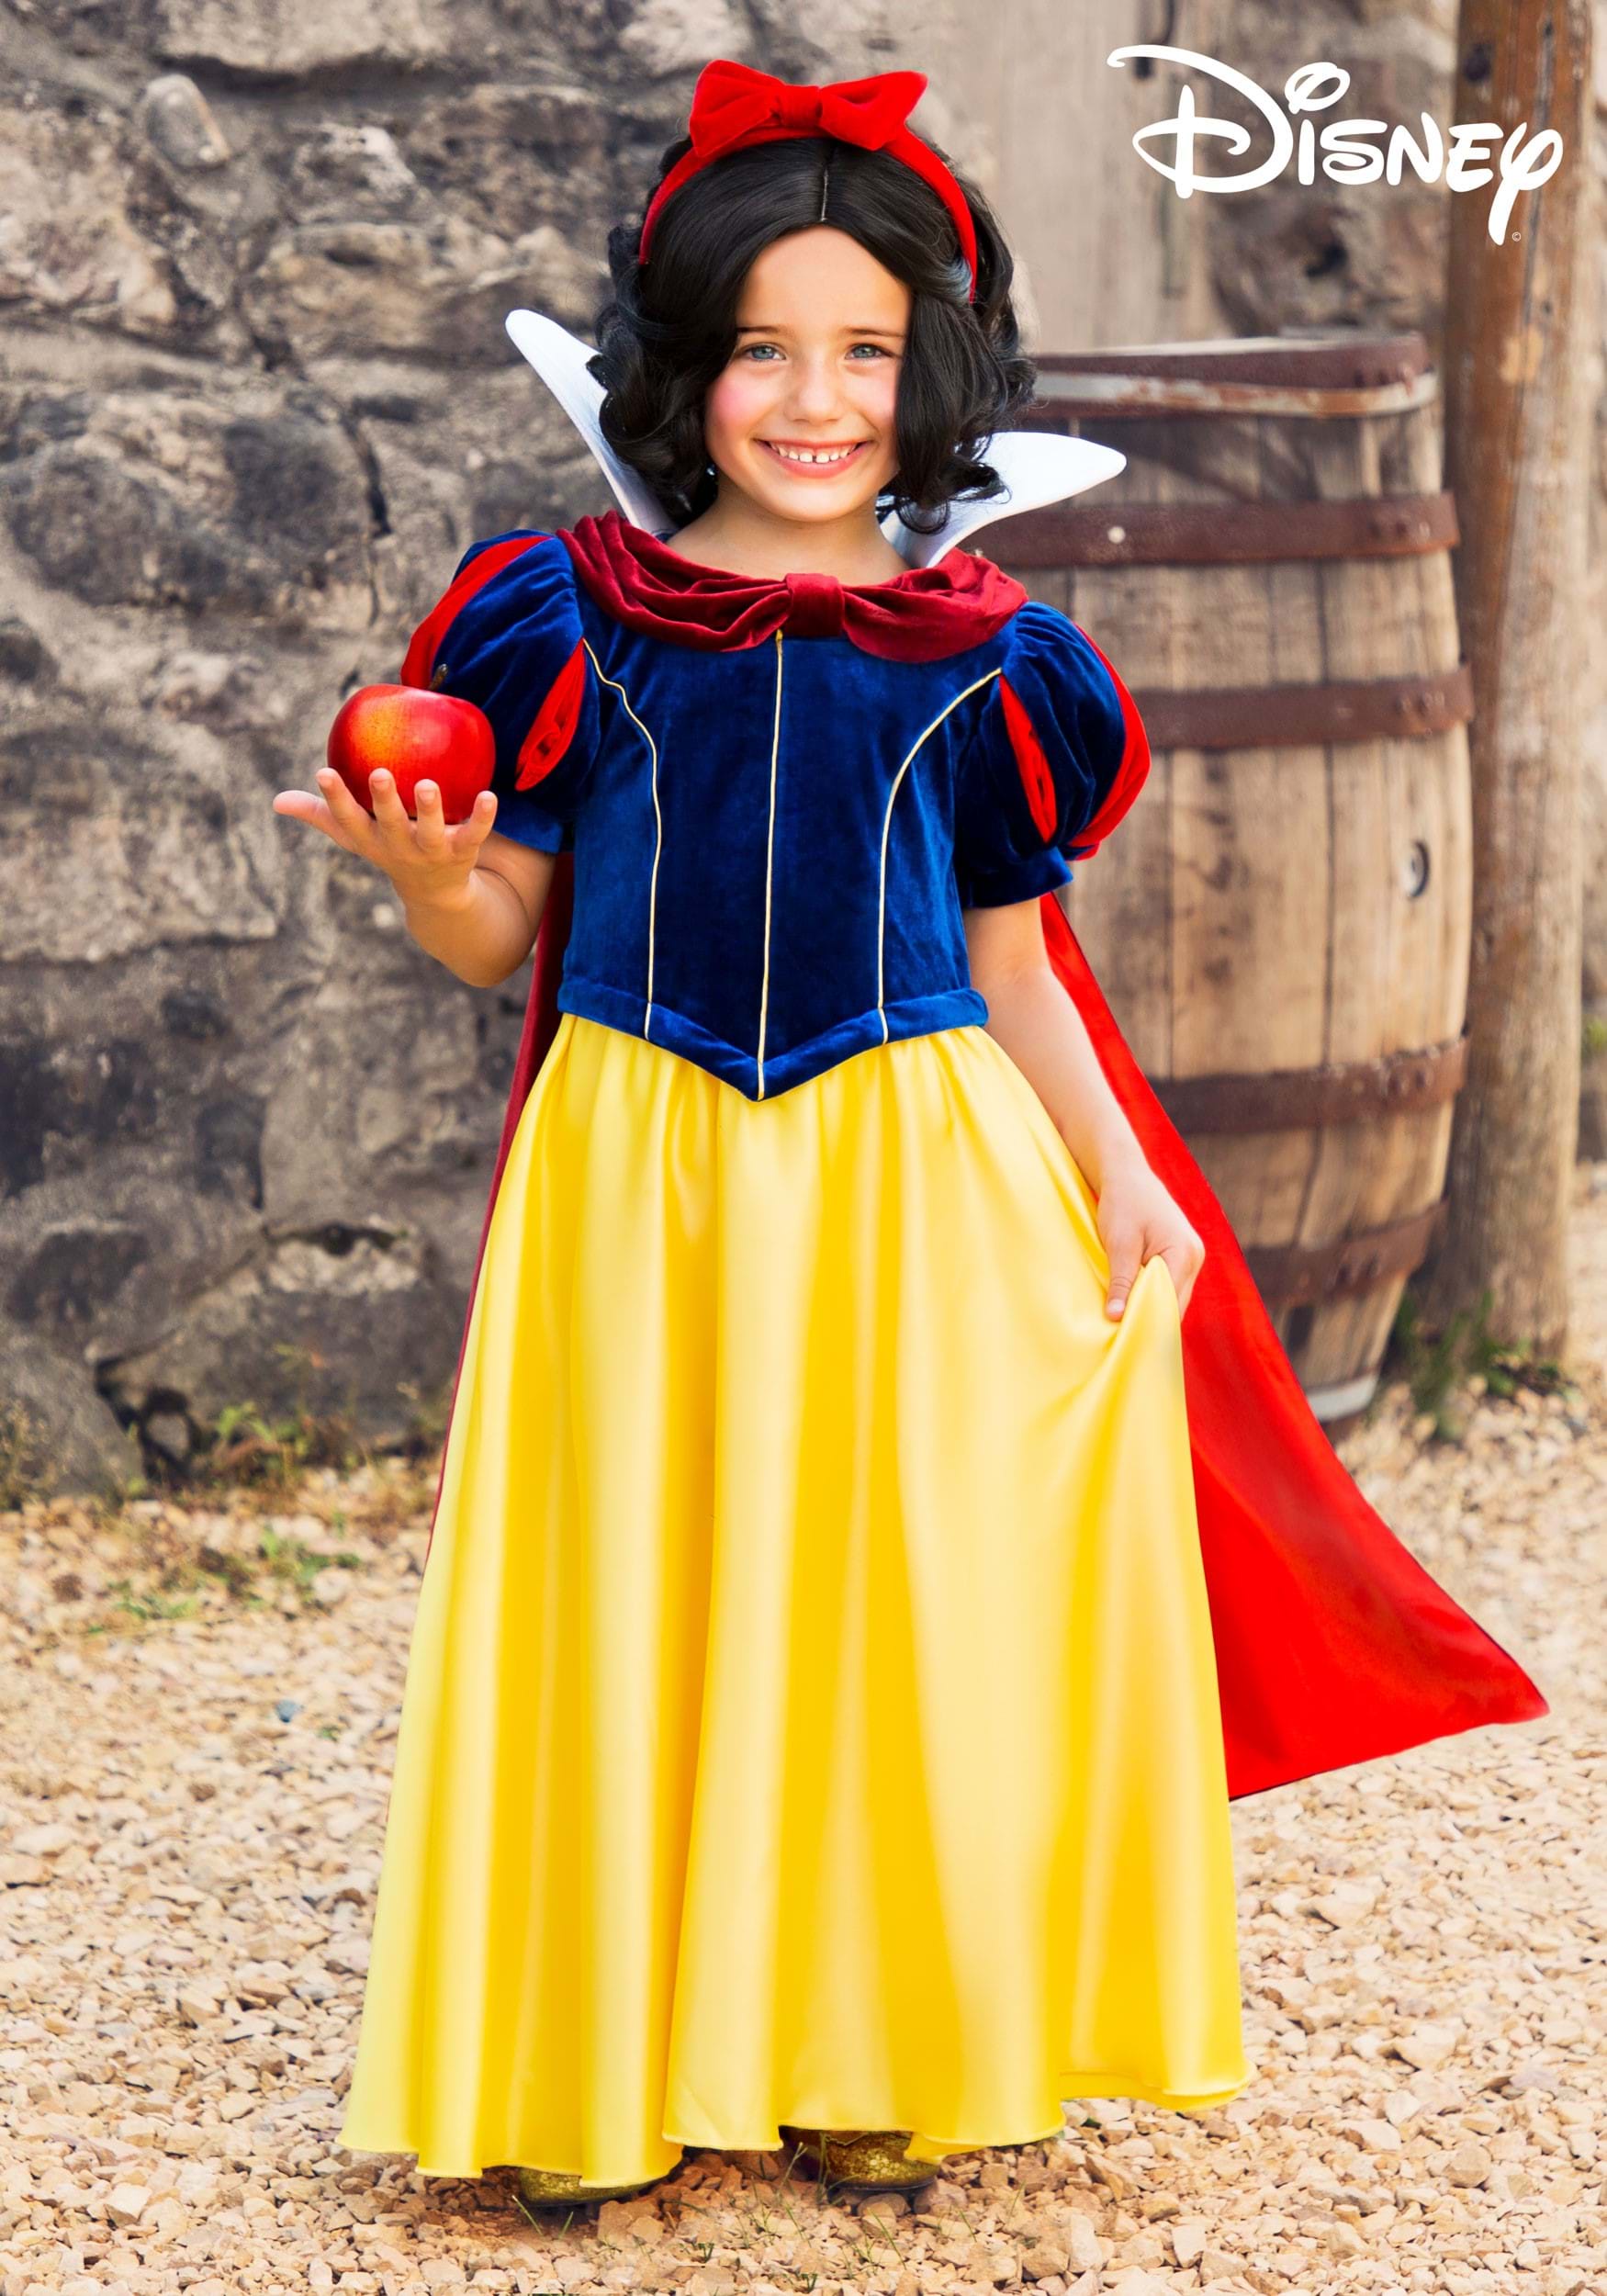 Halloween Costume Idea With Dogs: Snow White, The Evil Witch and